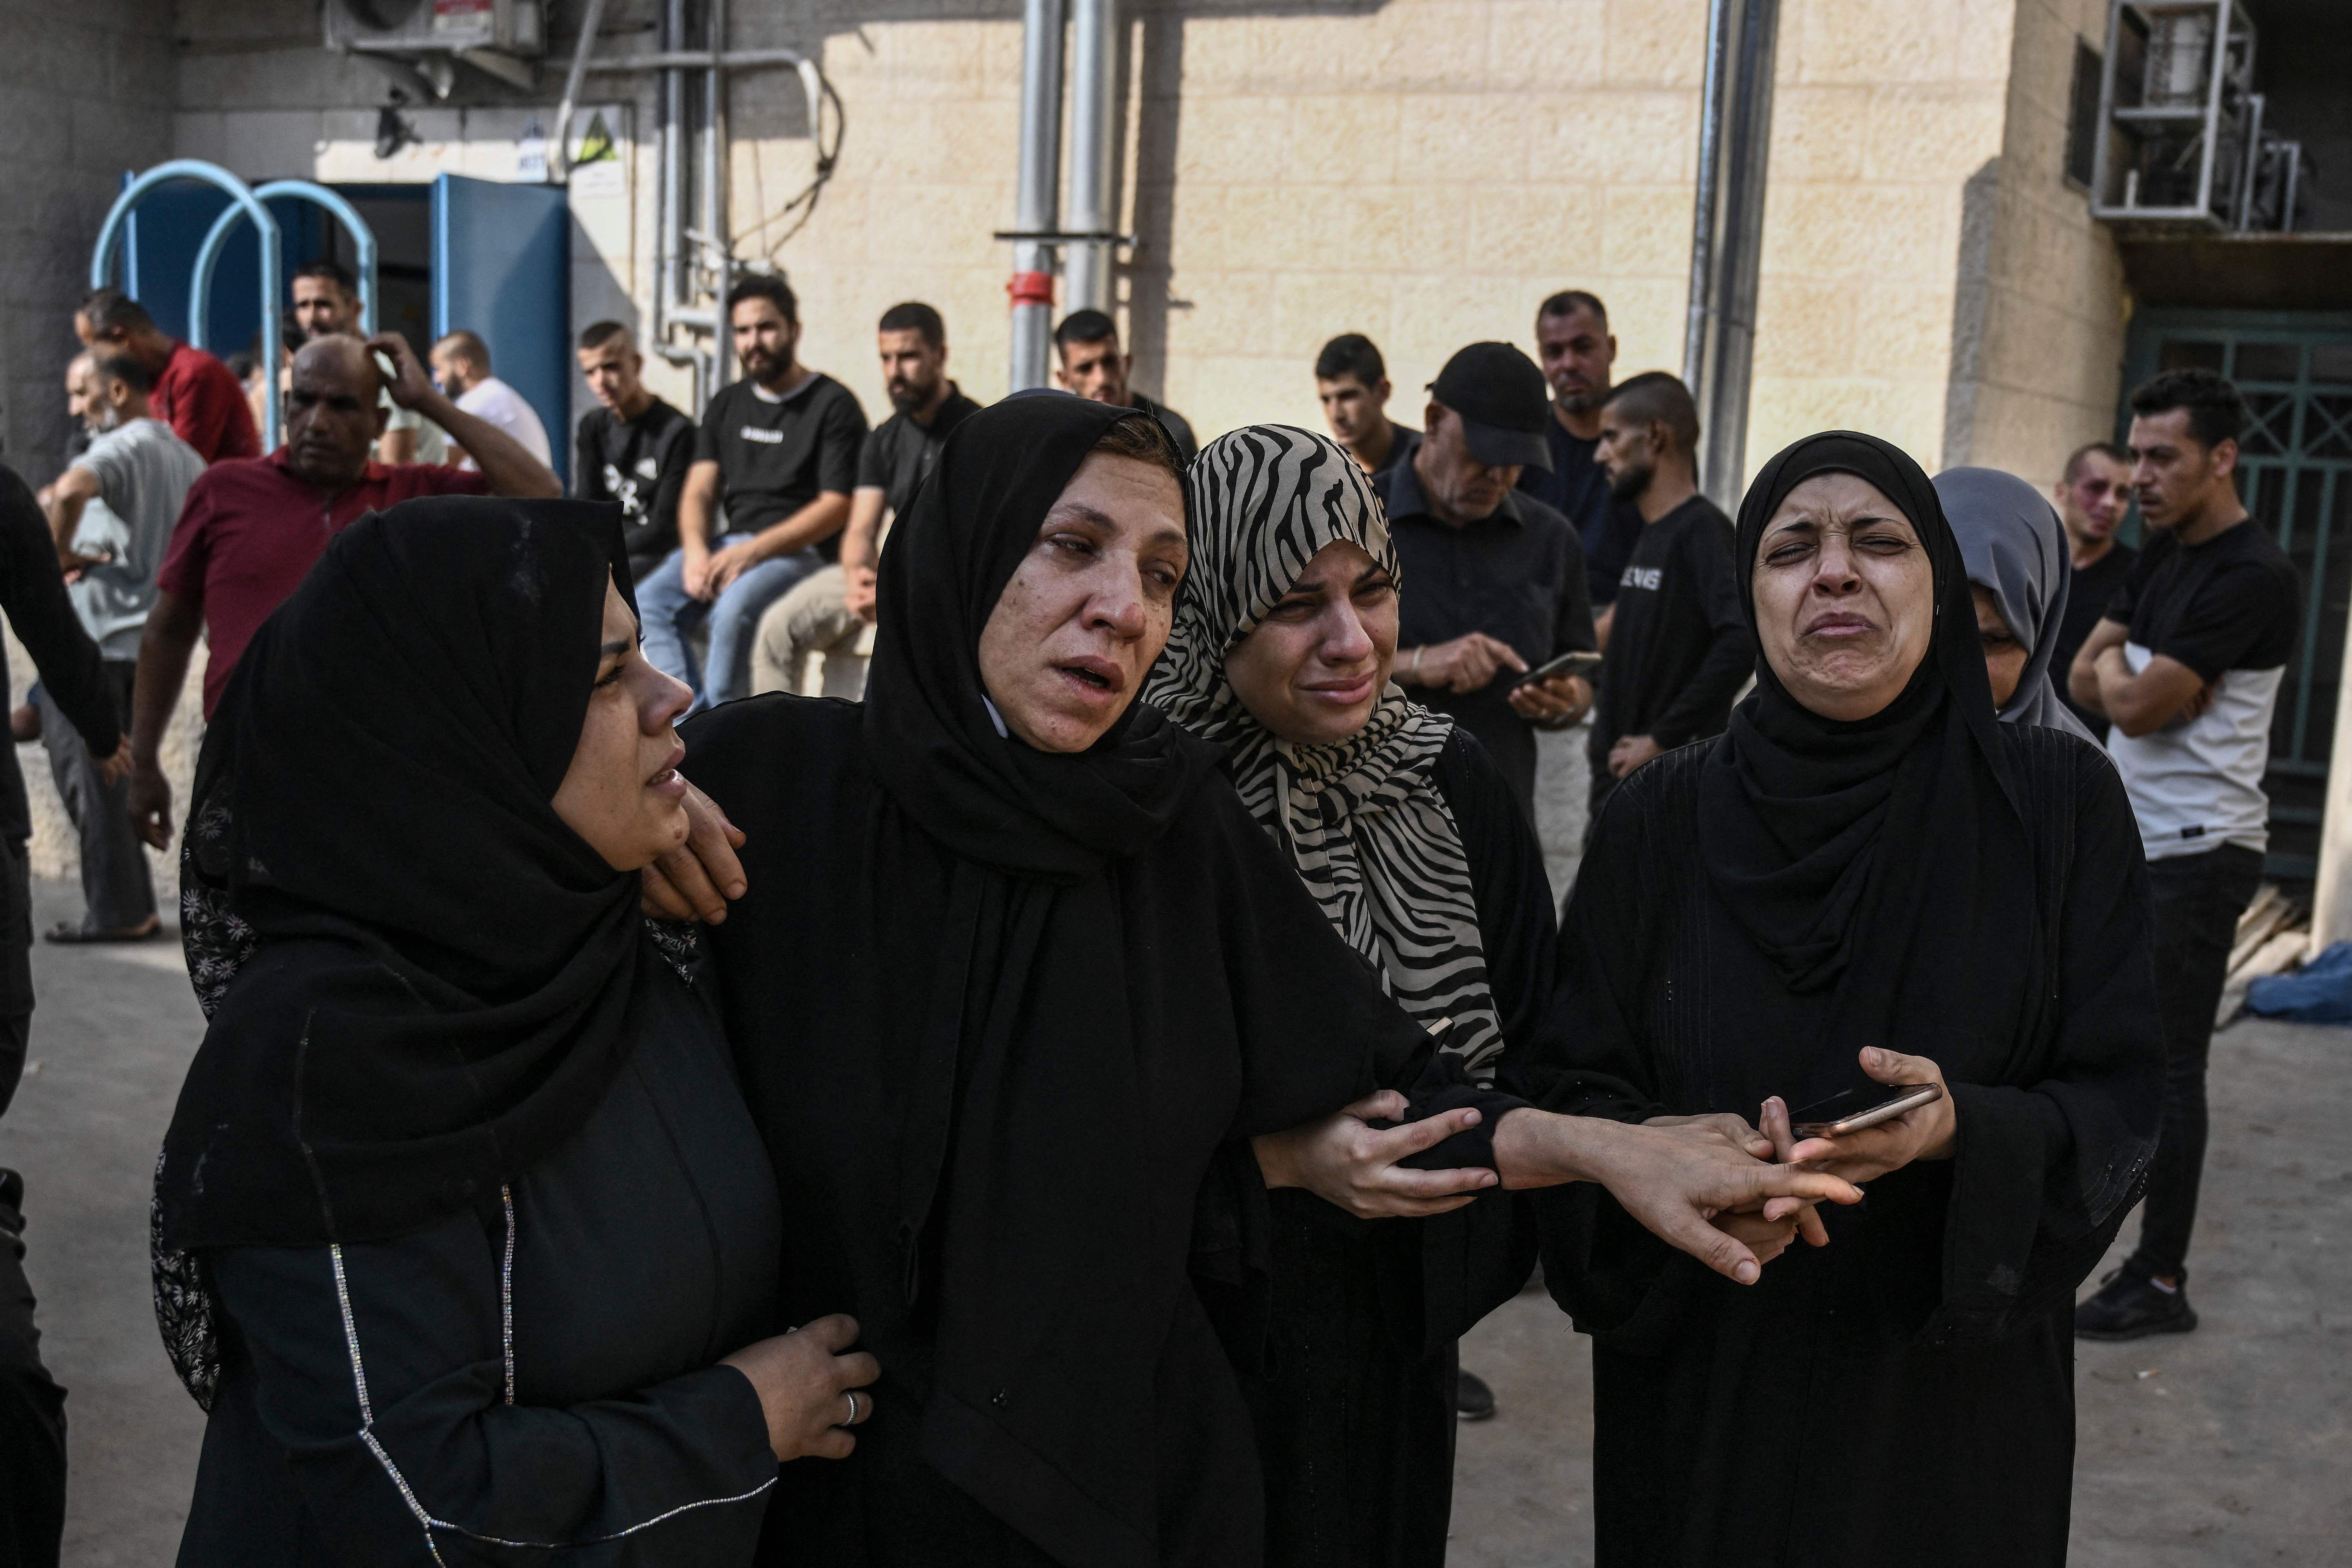 Palestinian relatives outside Jenin Hospital before a funeral of a man killed in the city